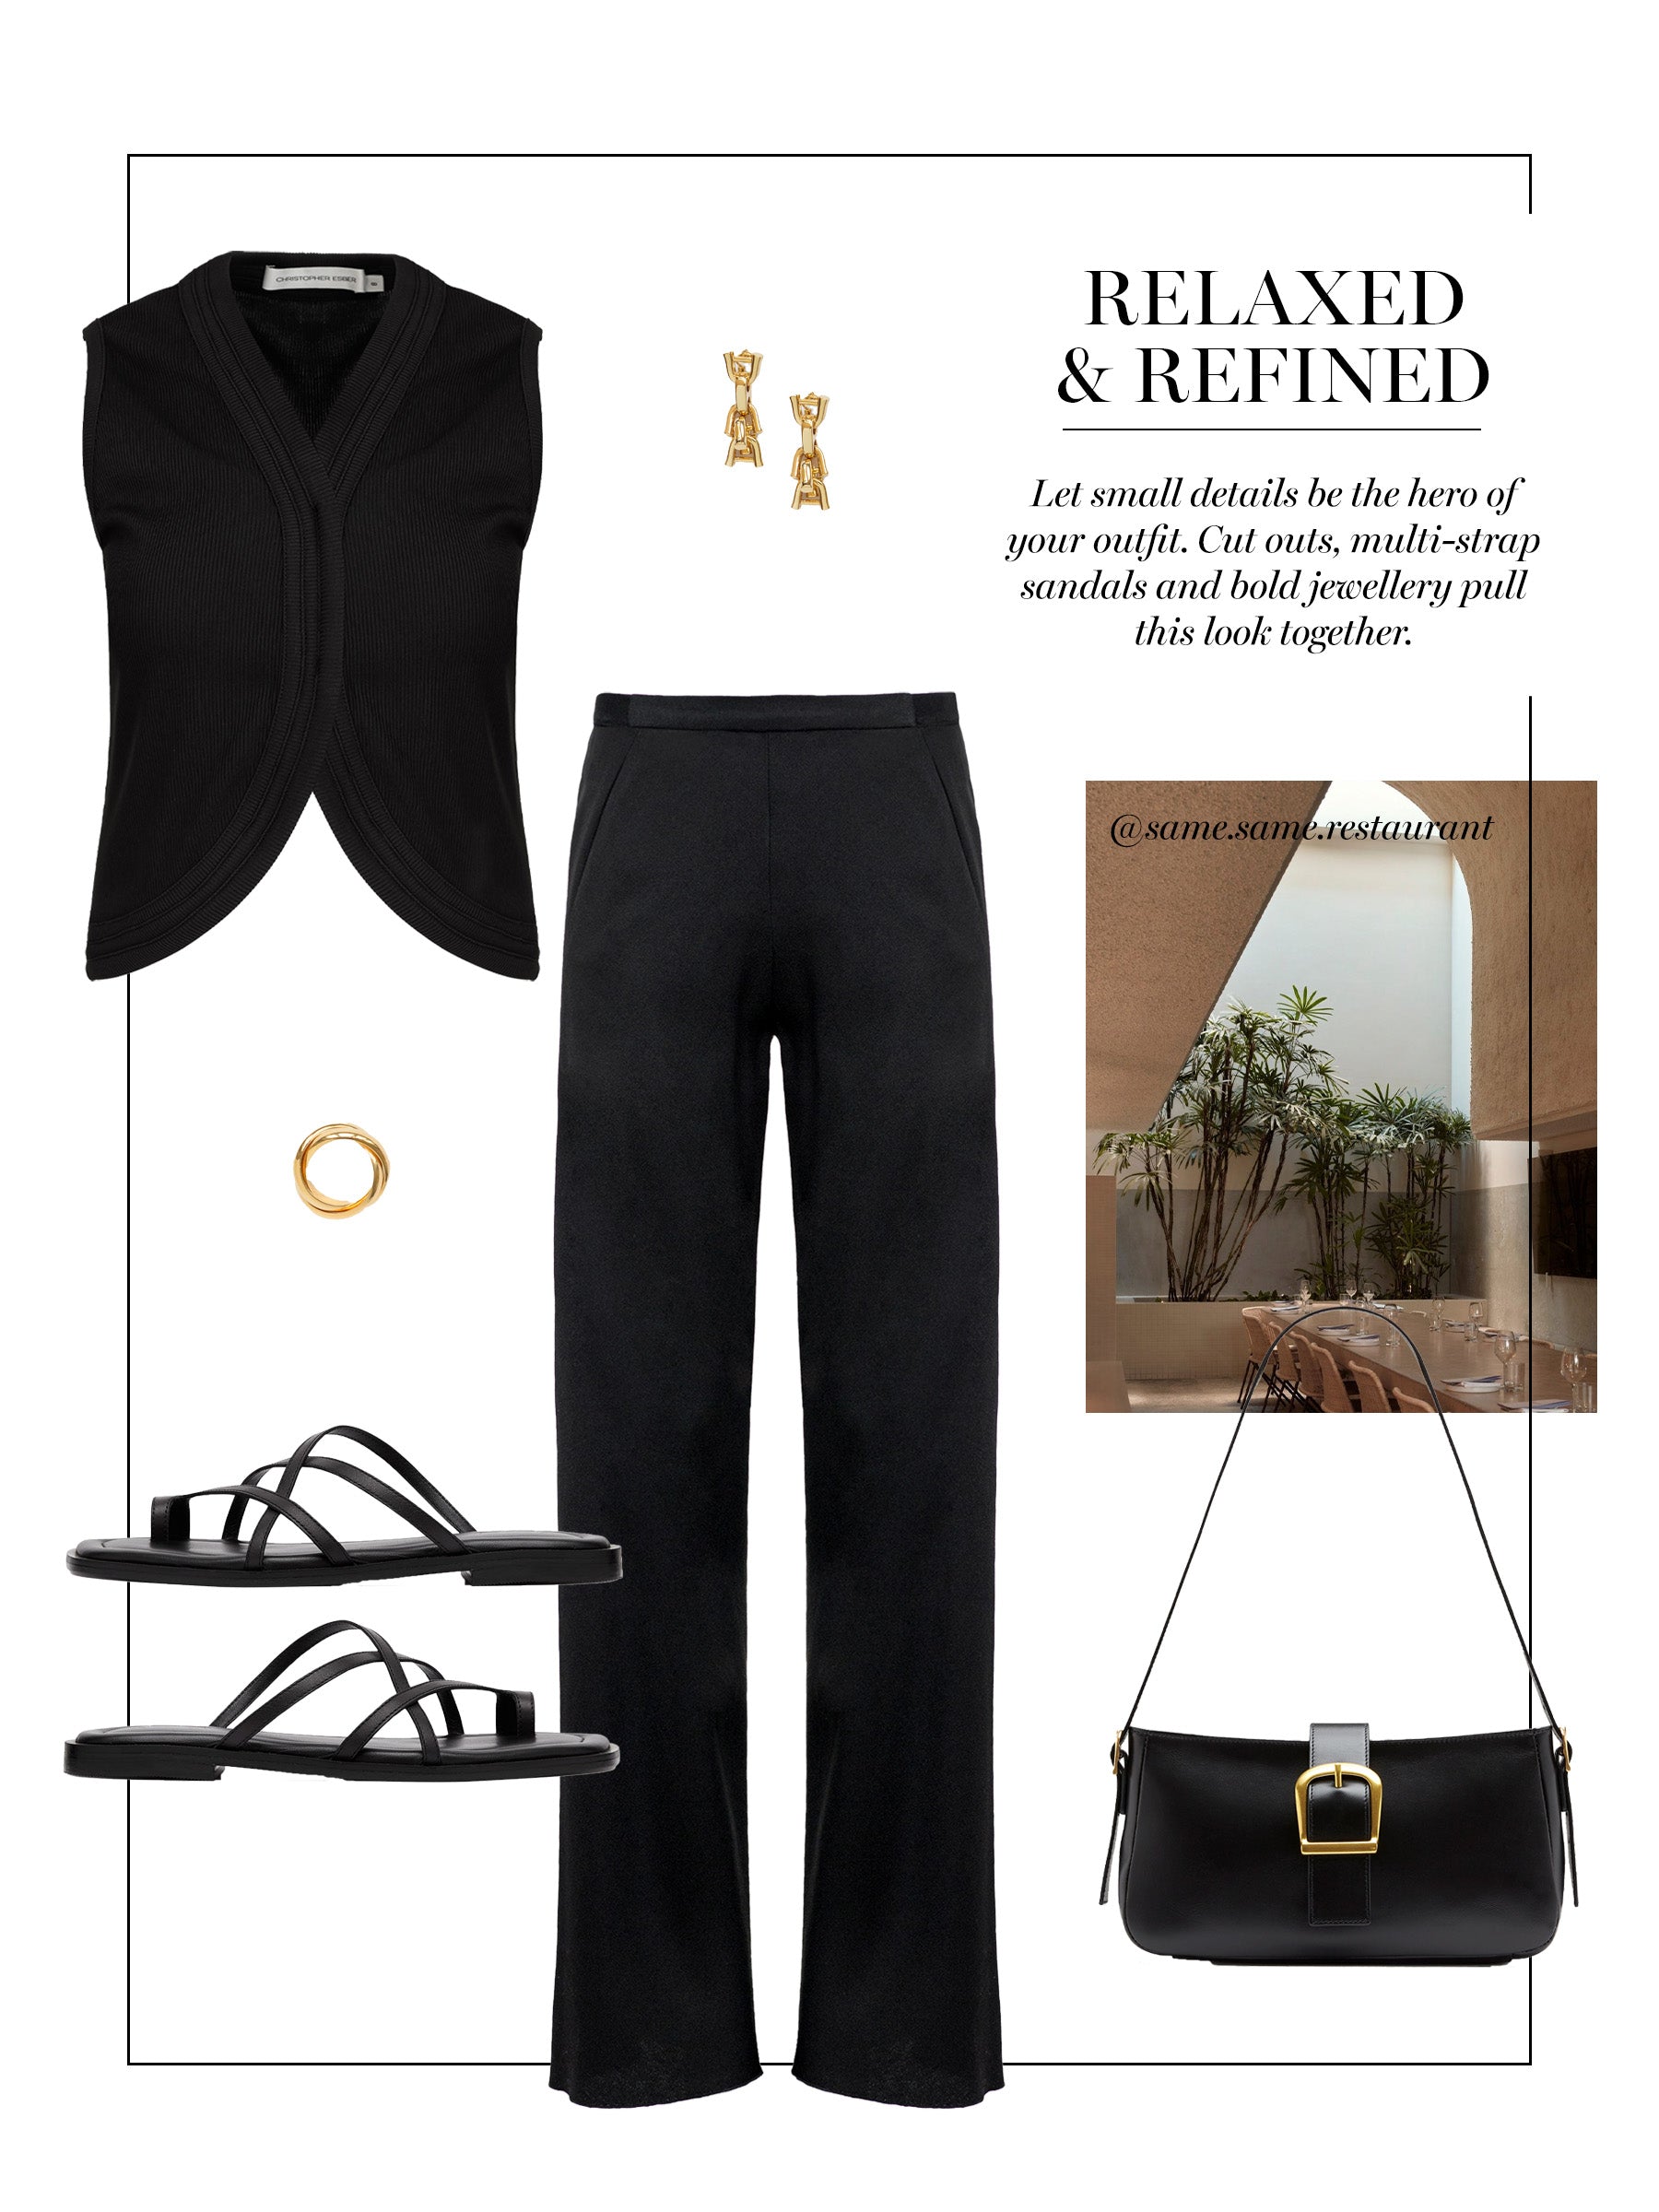 Black trousers with a black top and gold accessories